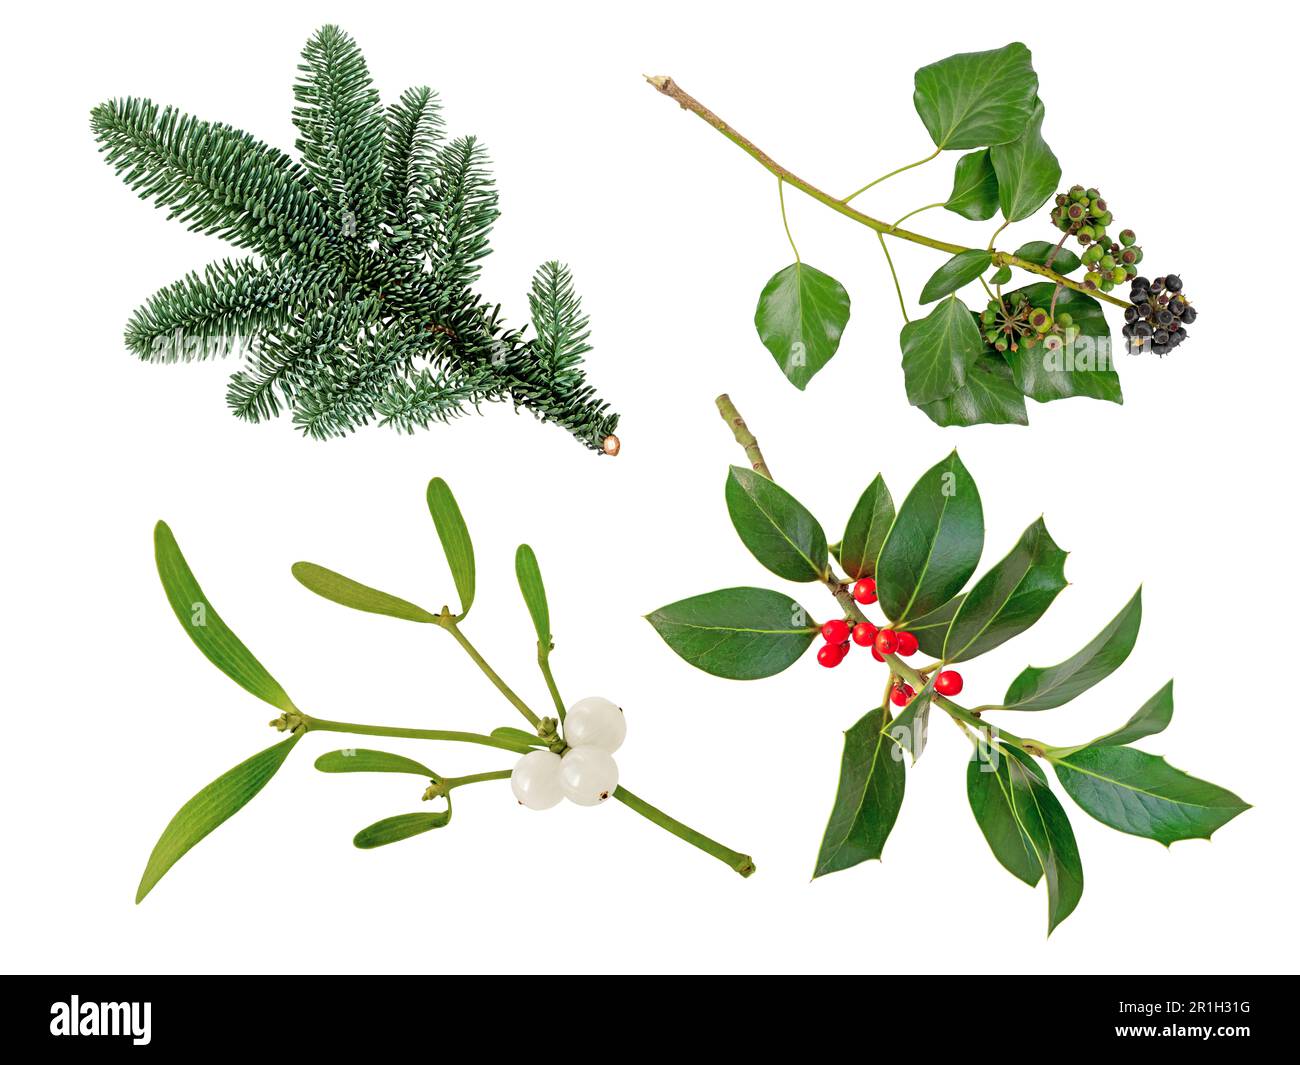 Christmas tree branch, mistletoe branch with white berries,Christmas holly branch and Ivy decoration plants set isolated on white Stock Photo